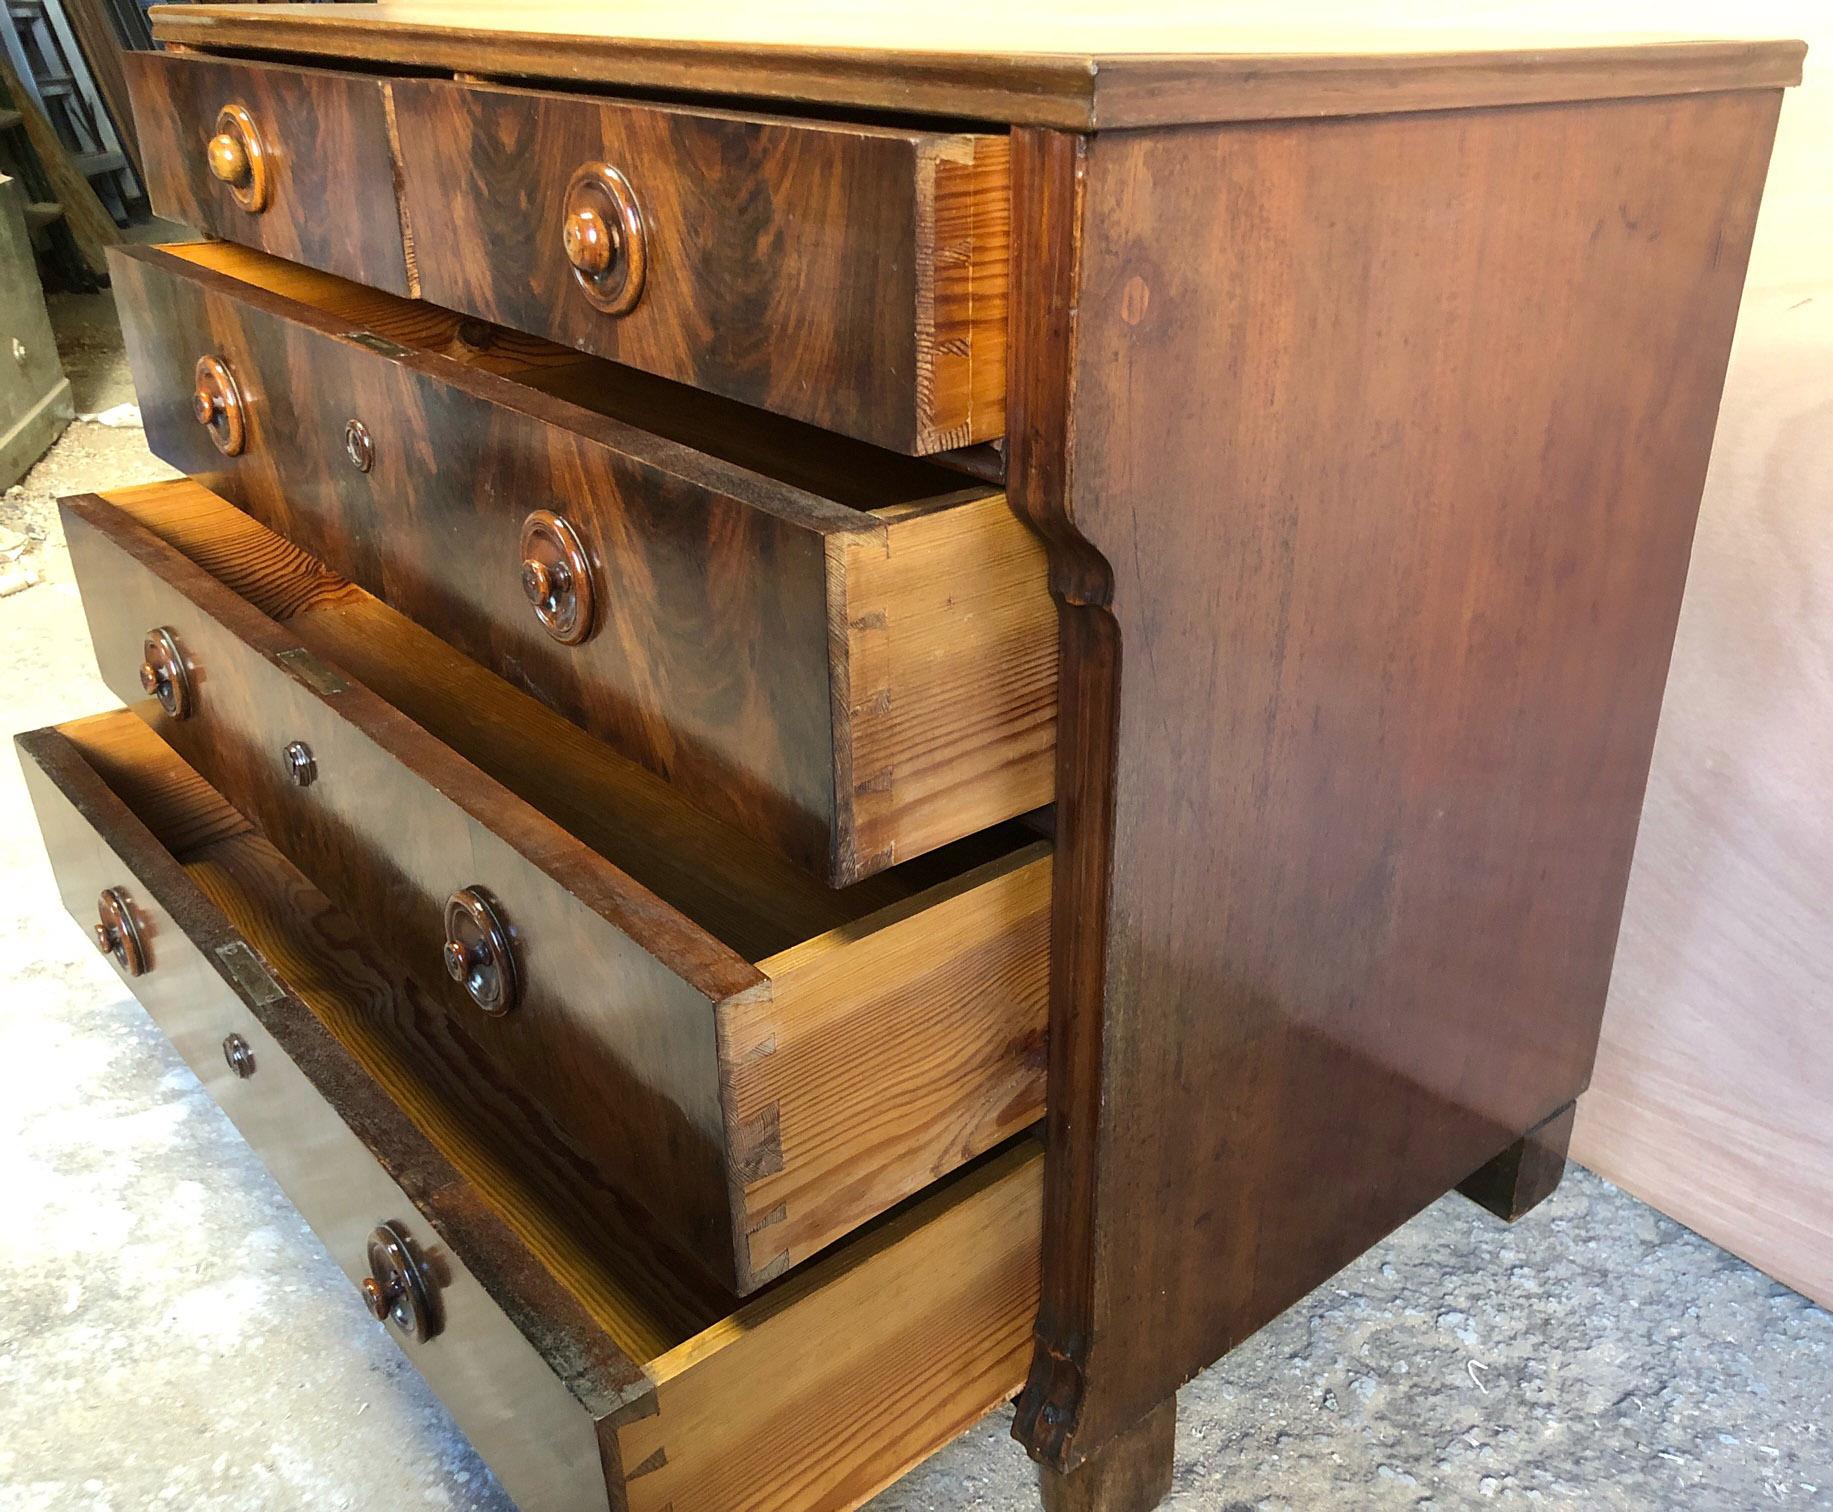 Rustic 1930 Chest of Drawers in Italian Walnut Original 5 Drawers Honey Color